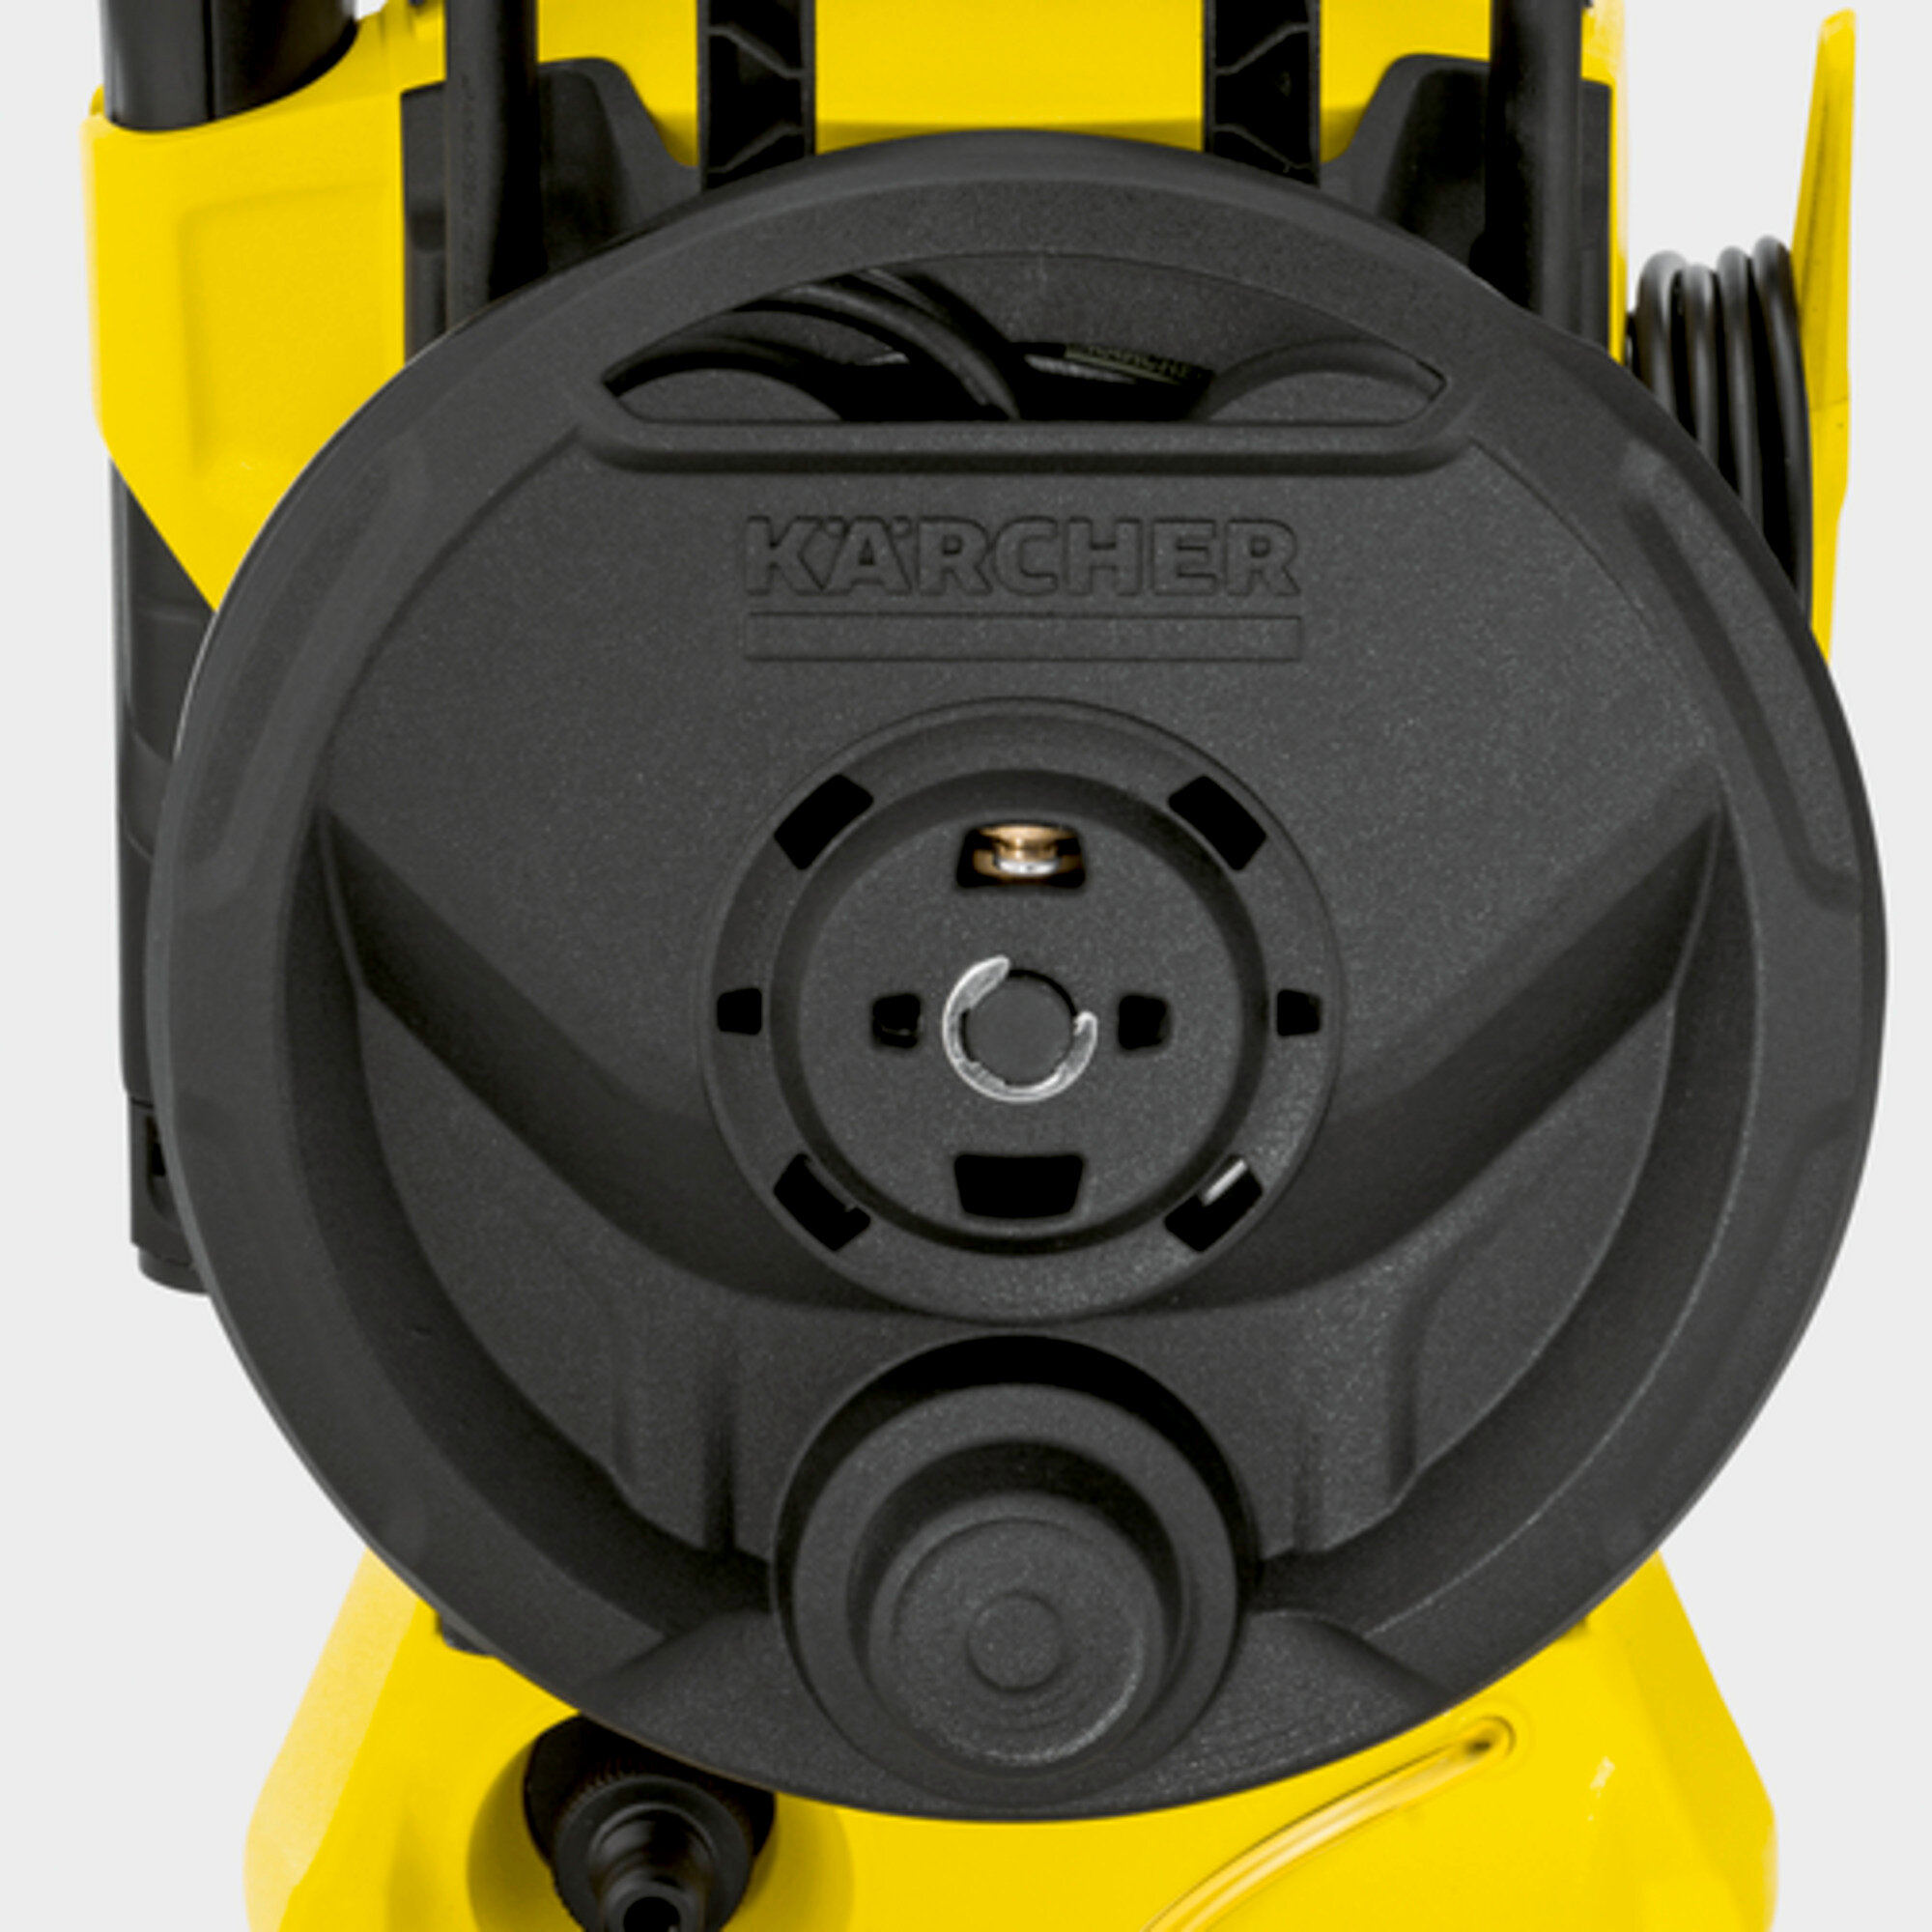 pressure washer k 3 premium power control: hose reel for convenient use of the device